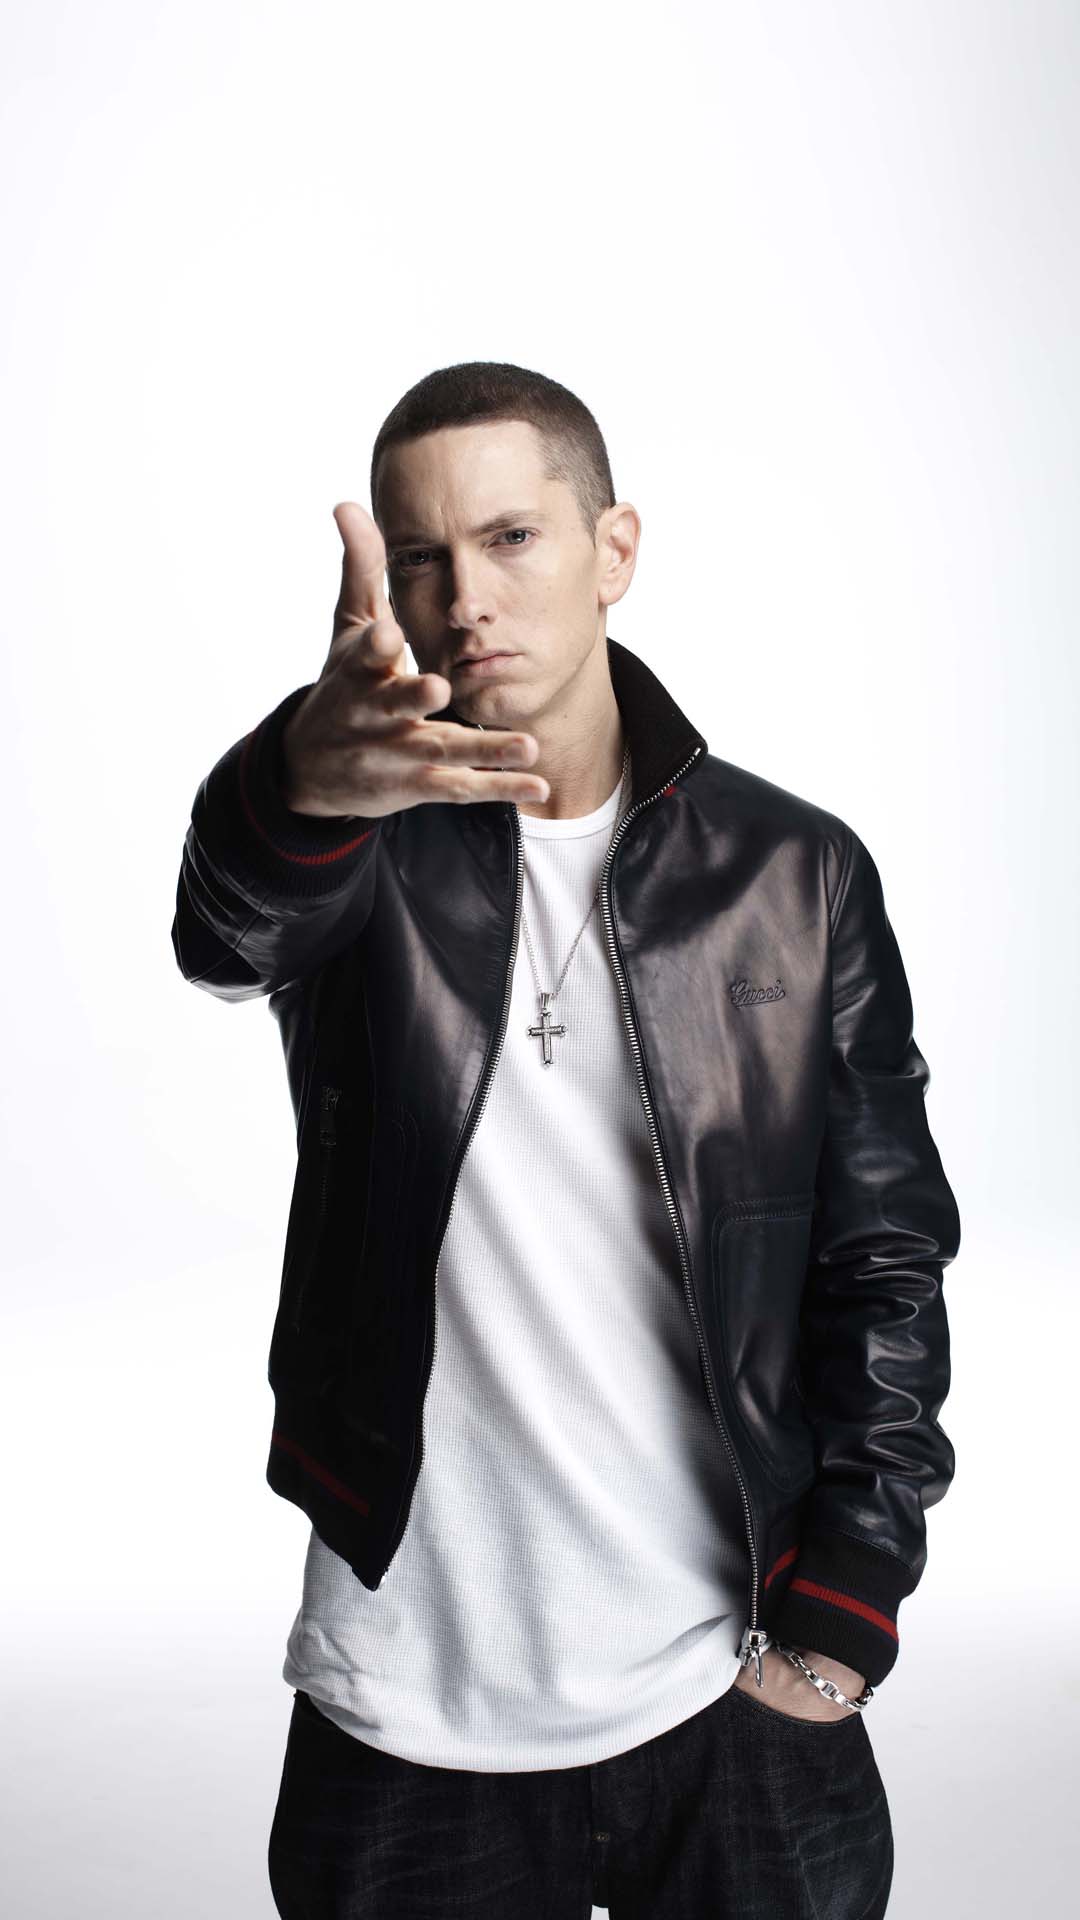 22 Eminem Hd Wallpapers For Mobile Devices On Wallpapersafari